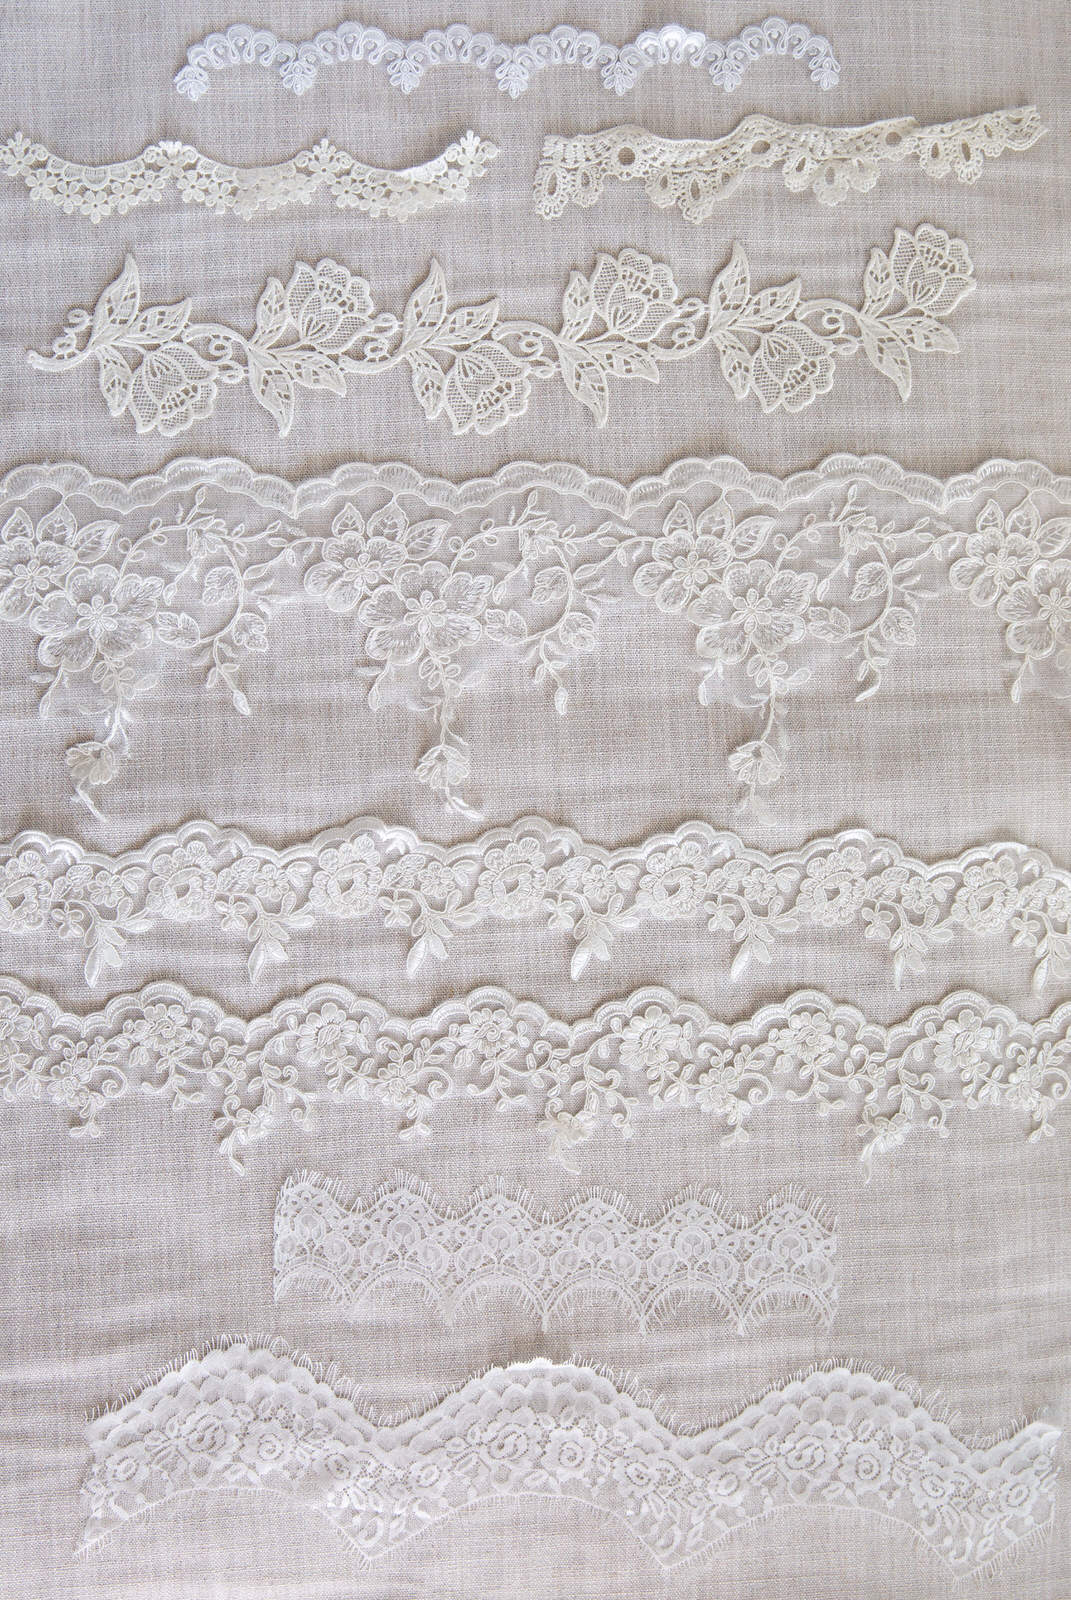 French alencon and Chantilly lace trims for veils